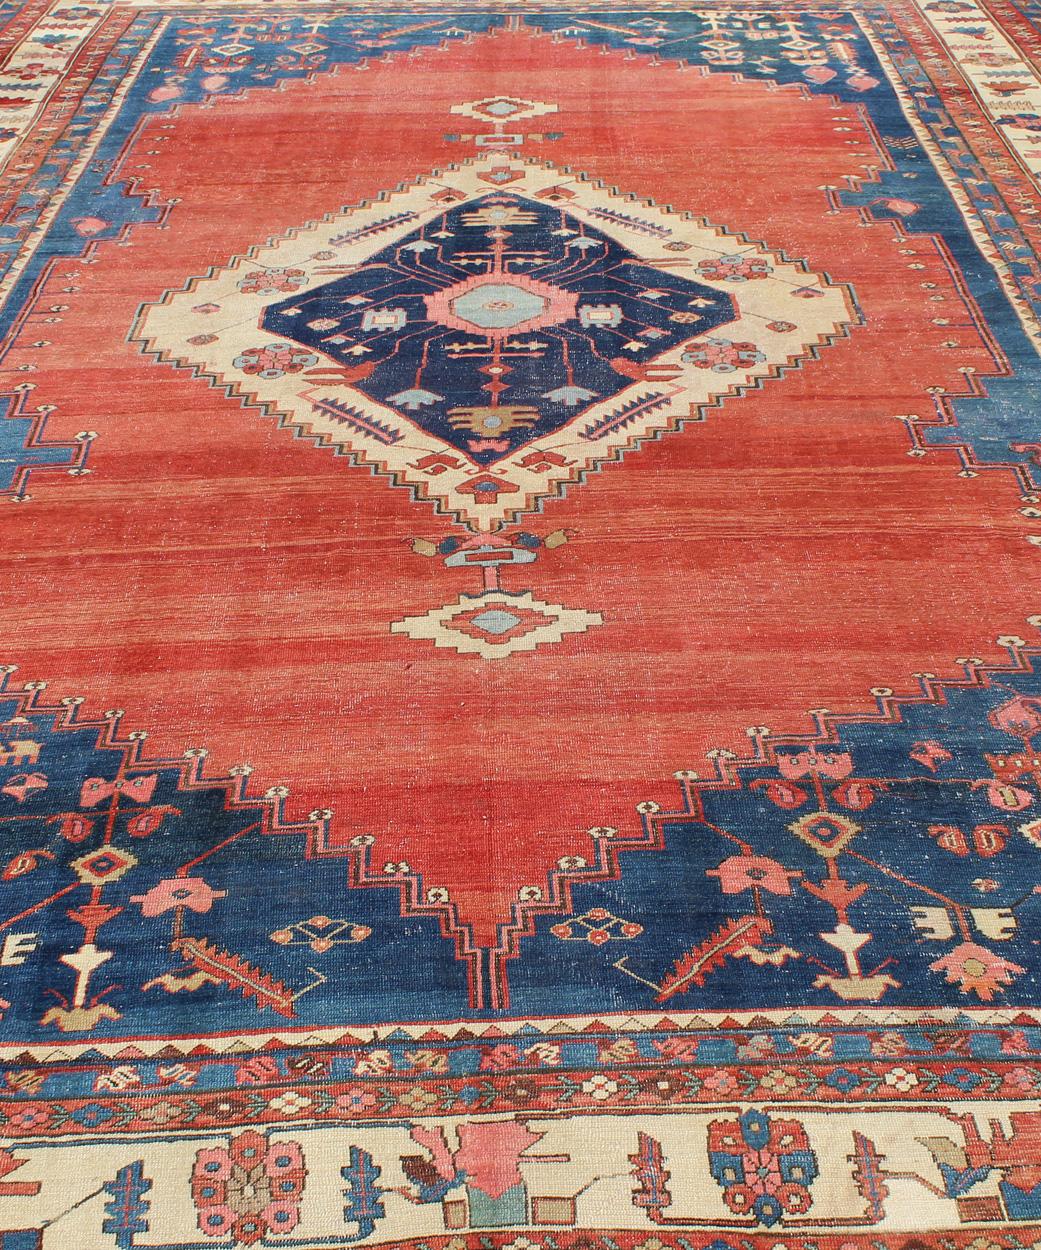 Finely Woven 19th Century Antique Persian Bakhshaiesh Rug in Rust Red and Blue For Sale 3